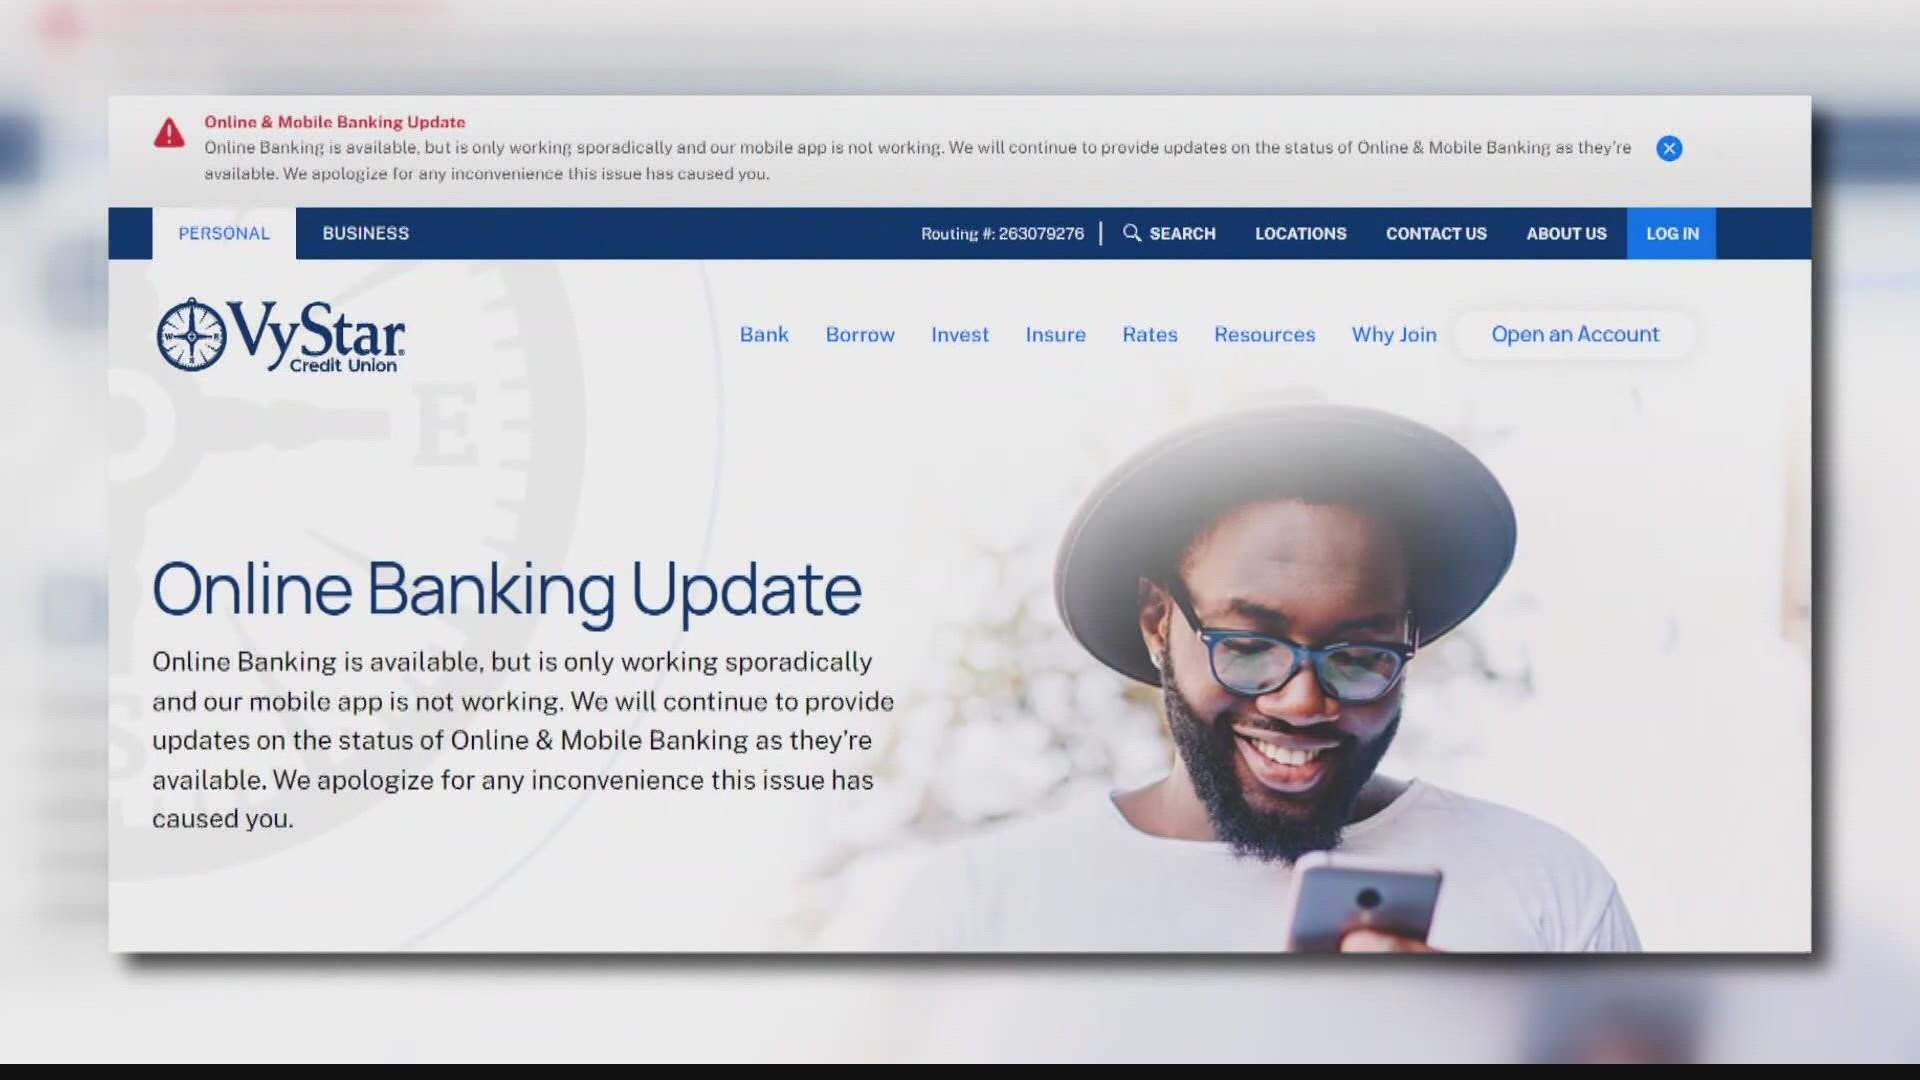 VyStar Credit Union's online and mobile bank system remains down